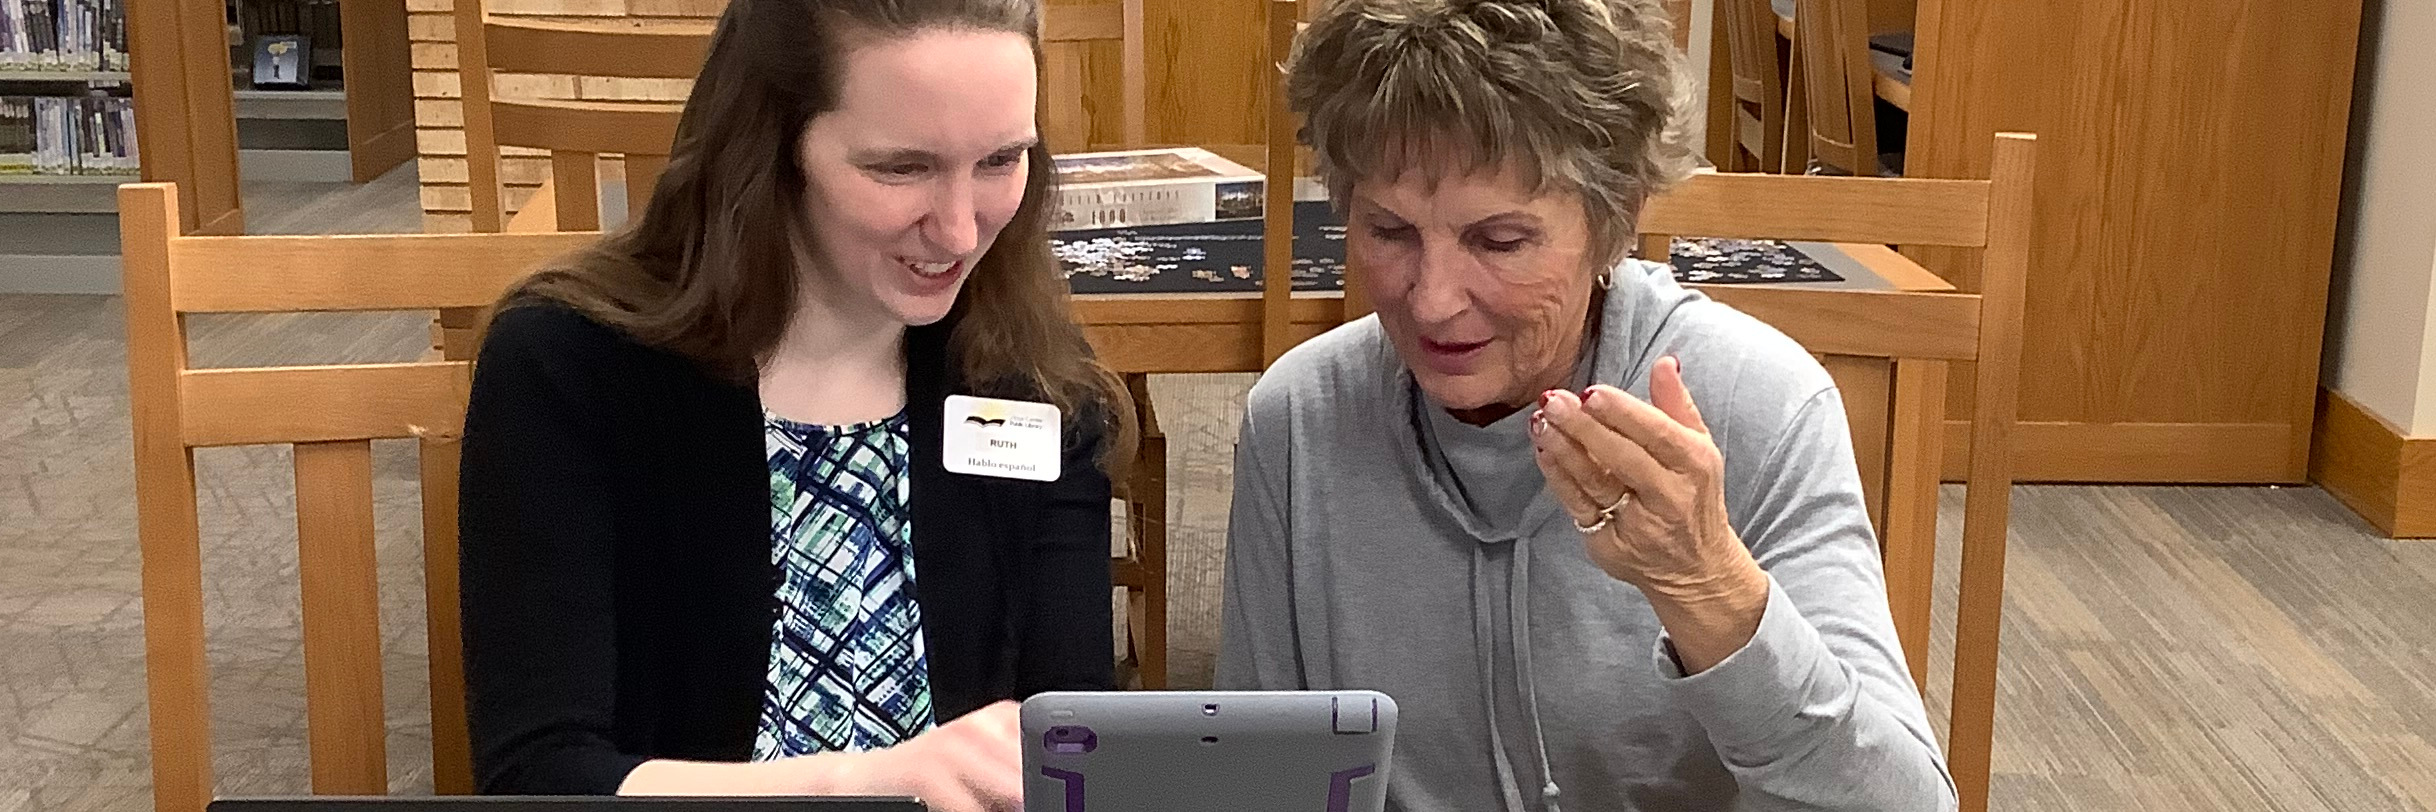 librarian helping a lady with a tech question on an iPad